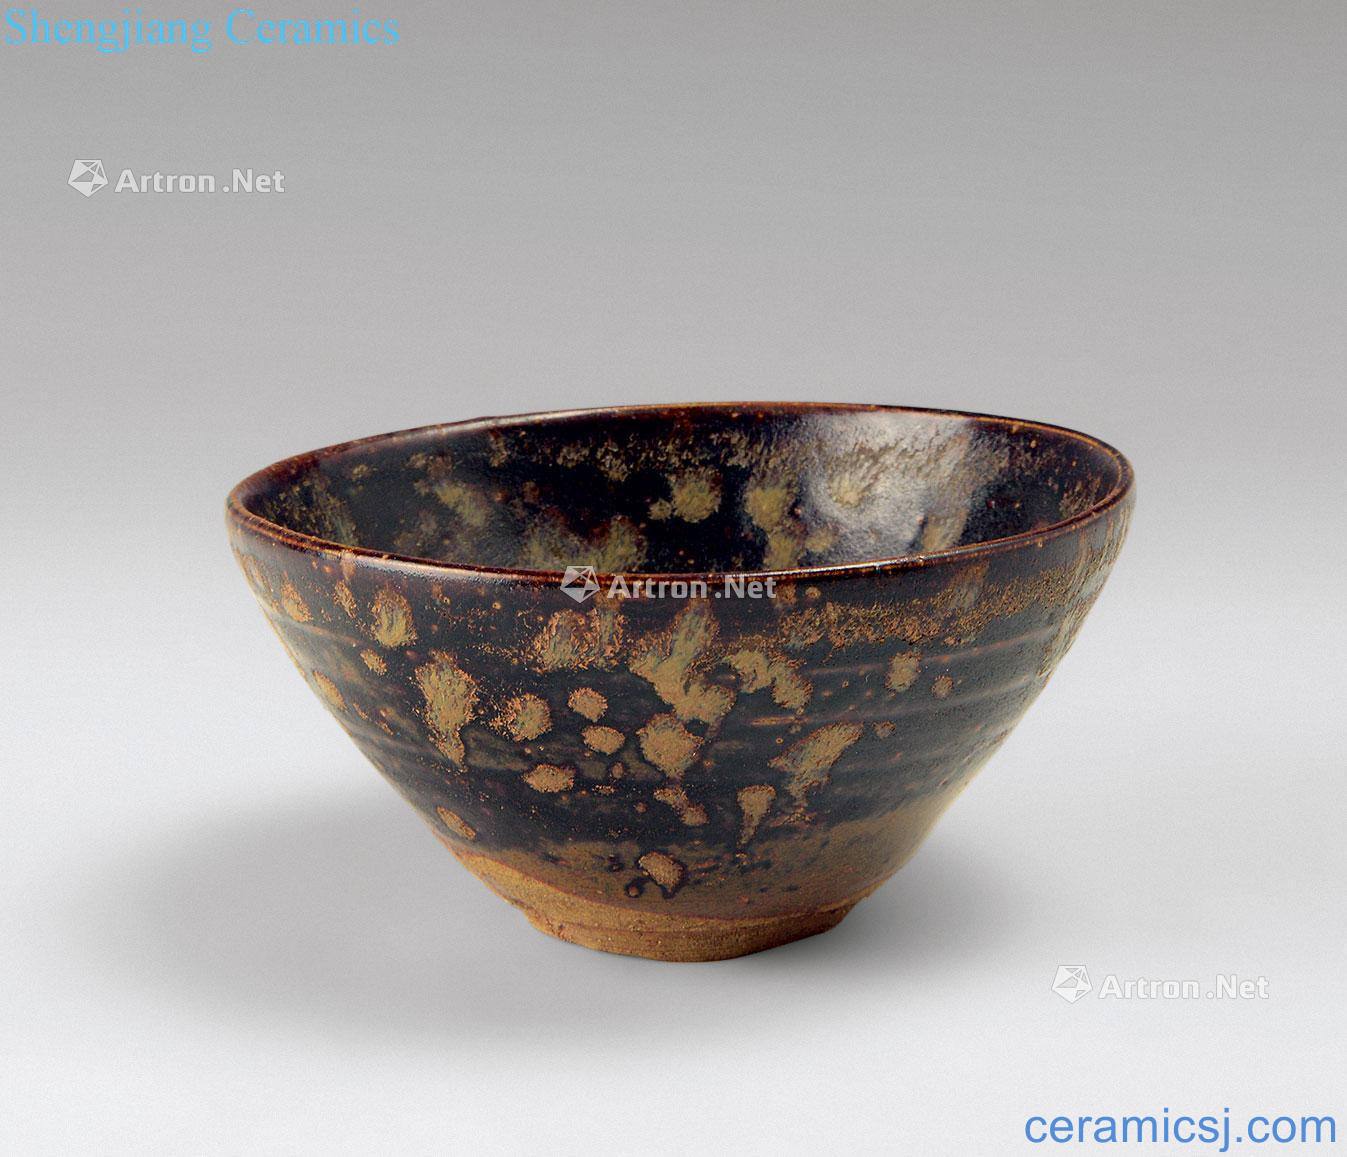 The song dynasty The tiger stripes bowl